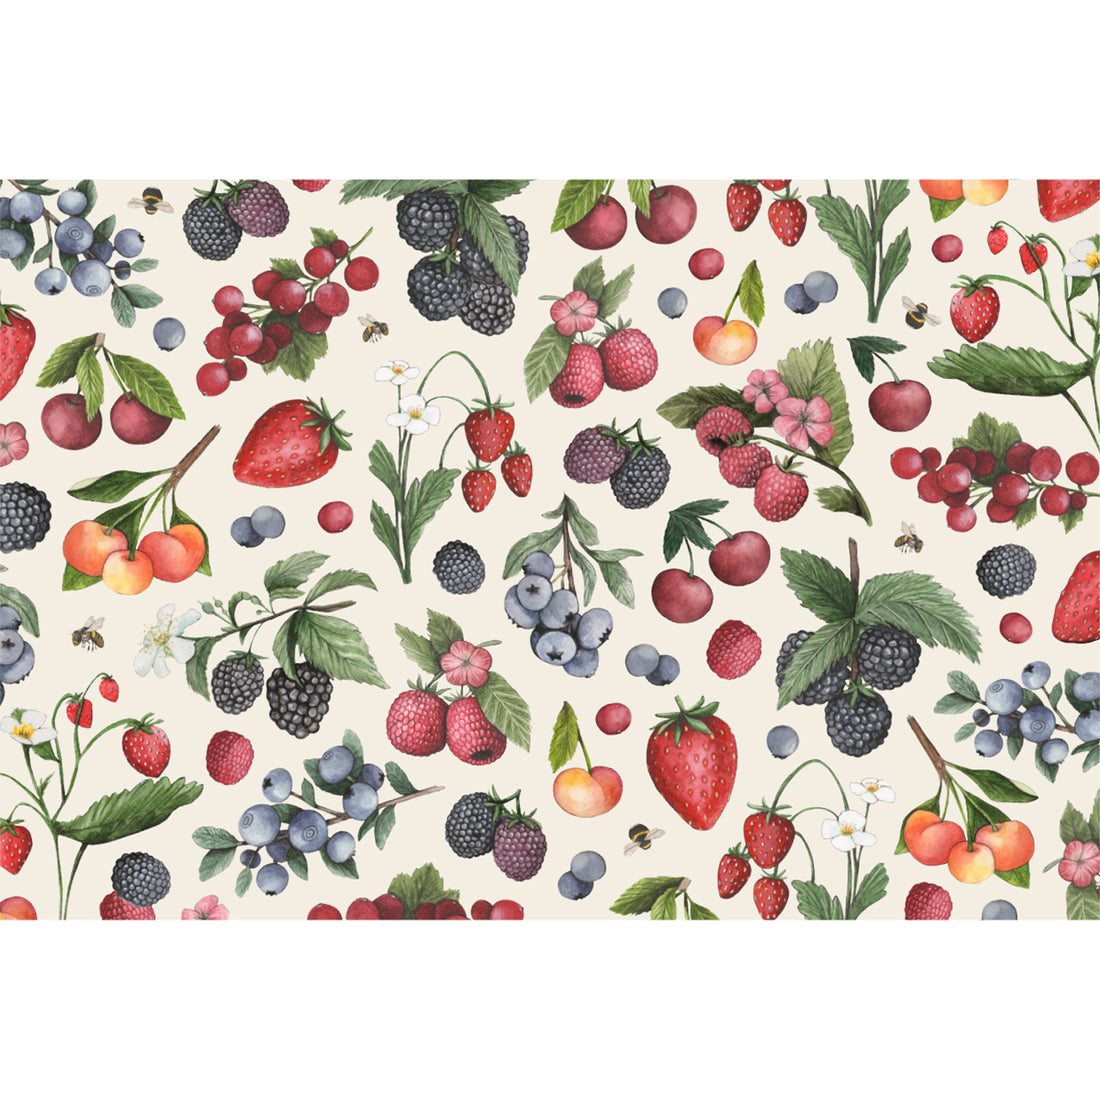 An illustrated scatter of various vibrant berries in red, blue, purple and orange, with green leaves and white blossoms on a cream background.